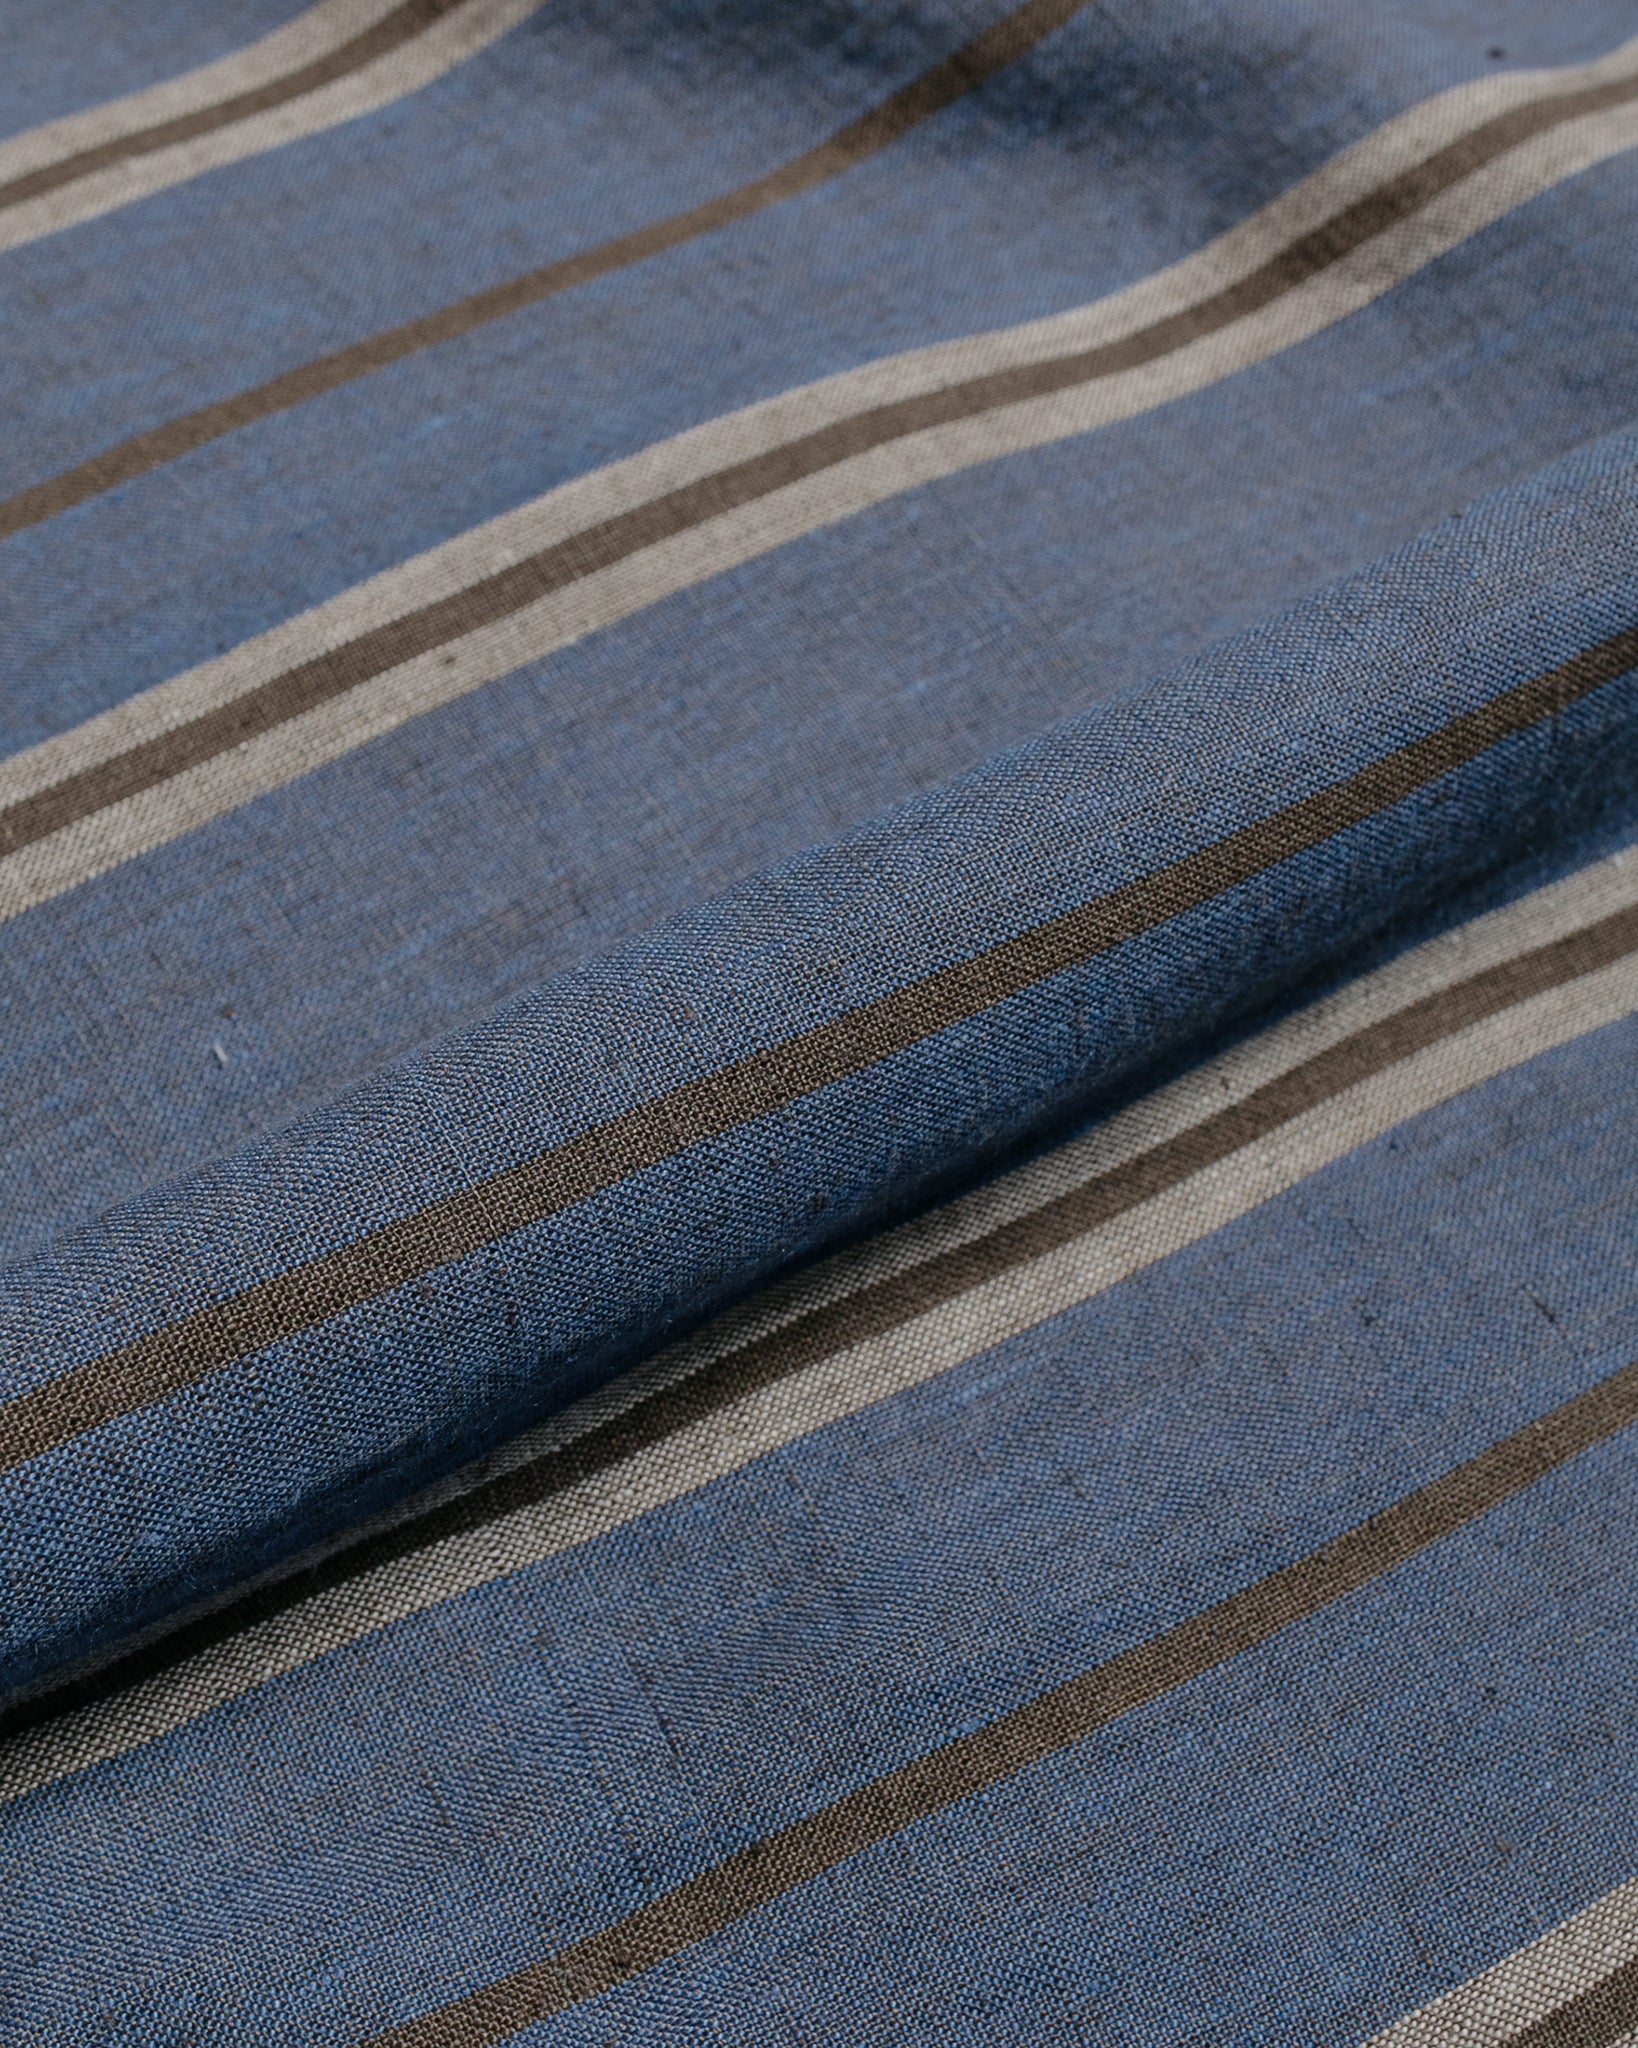 Another Aspect Another Shirt 2.0 Blue Brown Stripe fabric